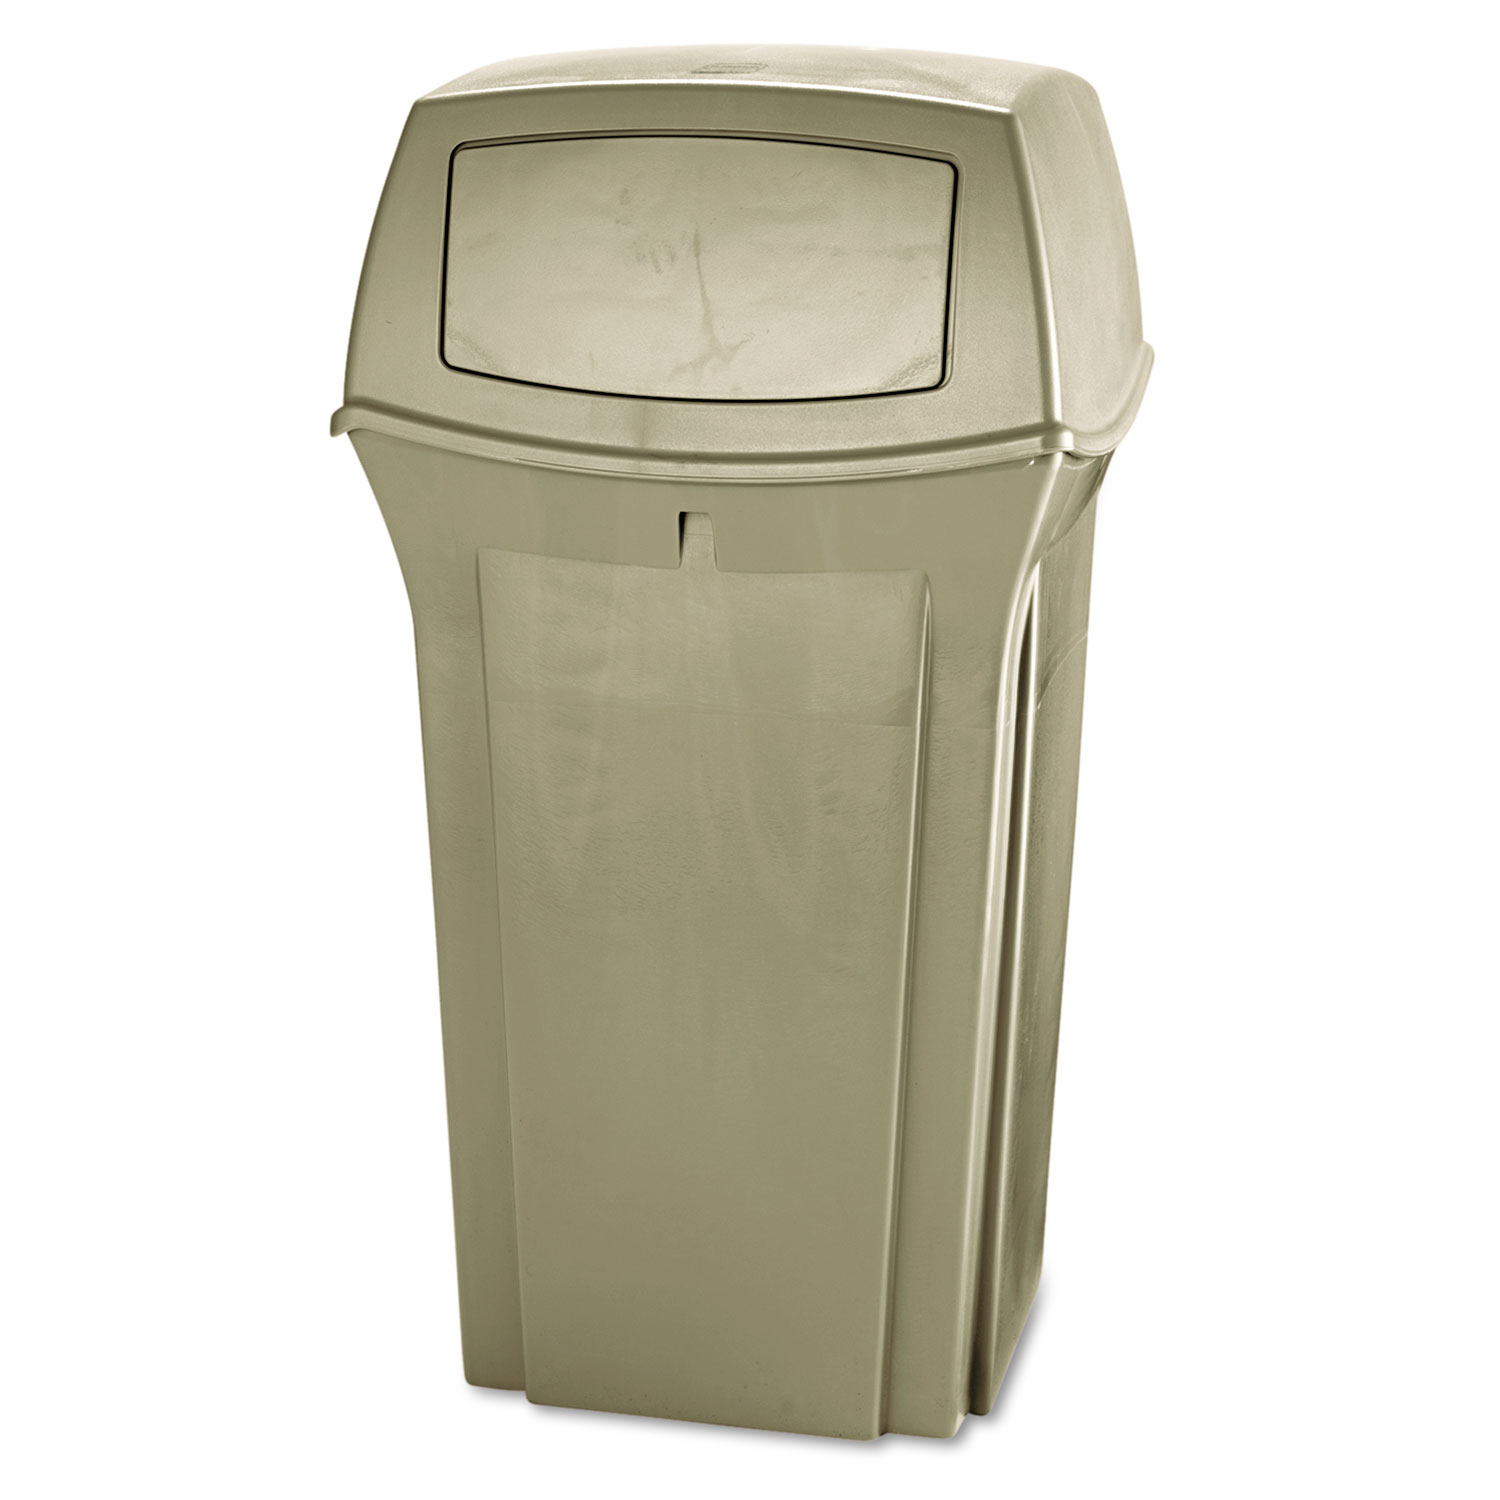  Rubbermaid Commercial FG843088BEIG Ranger Fire-Safe Container, Square, Structural Foam, 35 gal, Beige (RCP843088BG) 